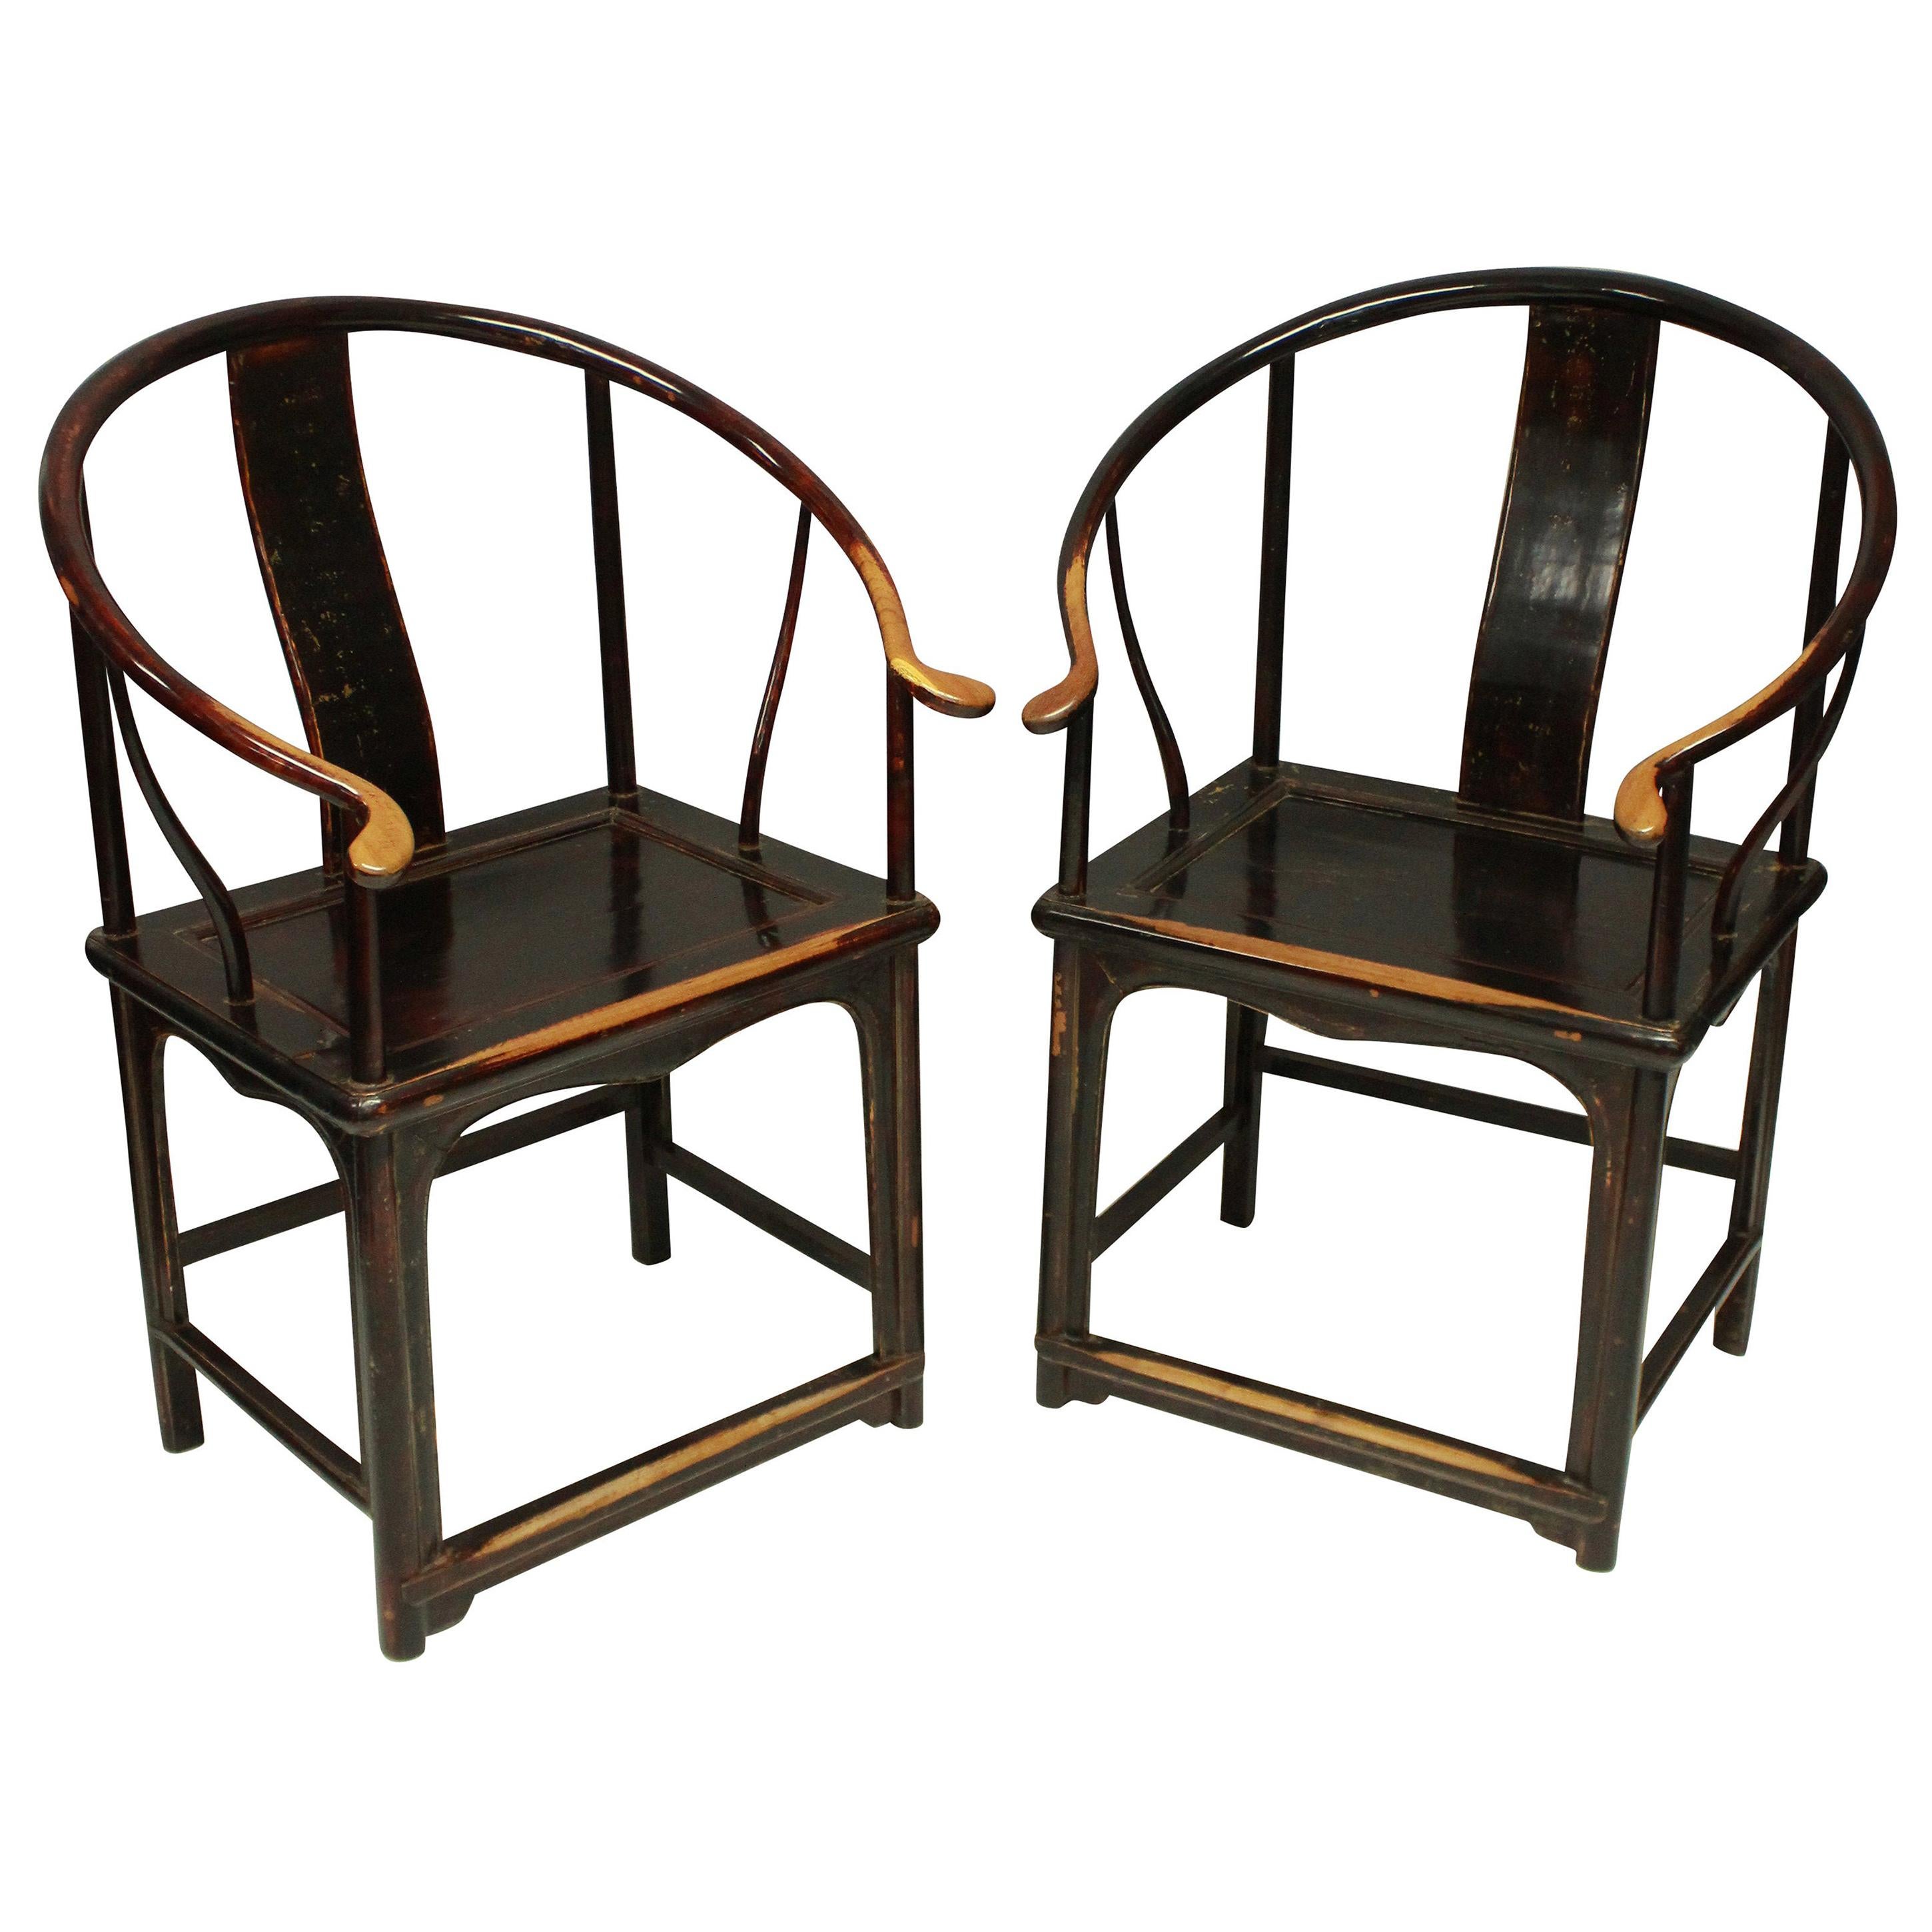 Pair of 19th Century Chinese Armchairs